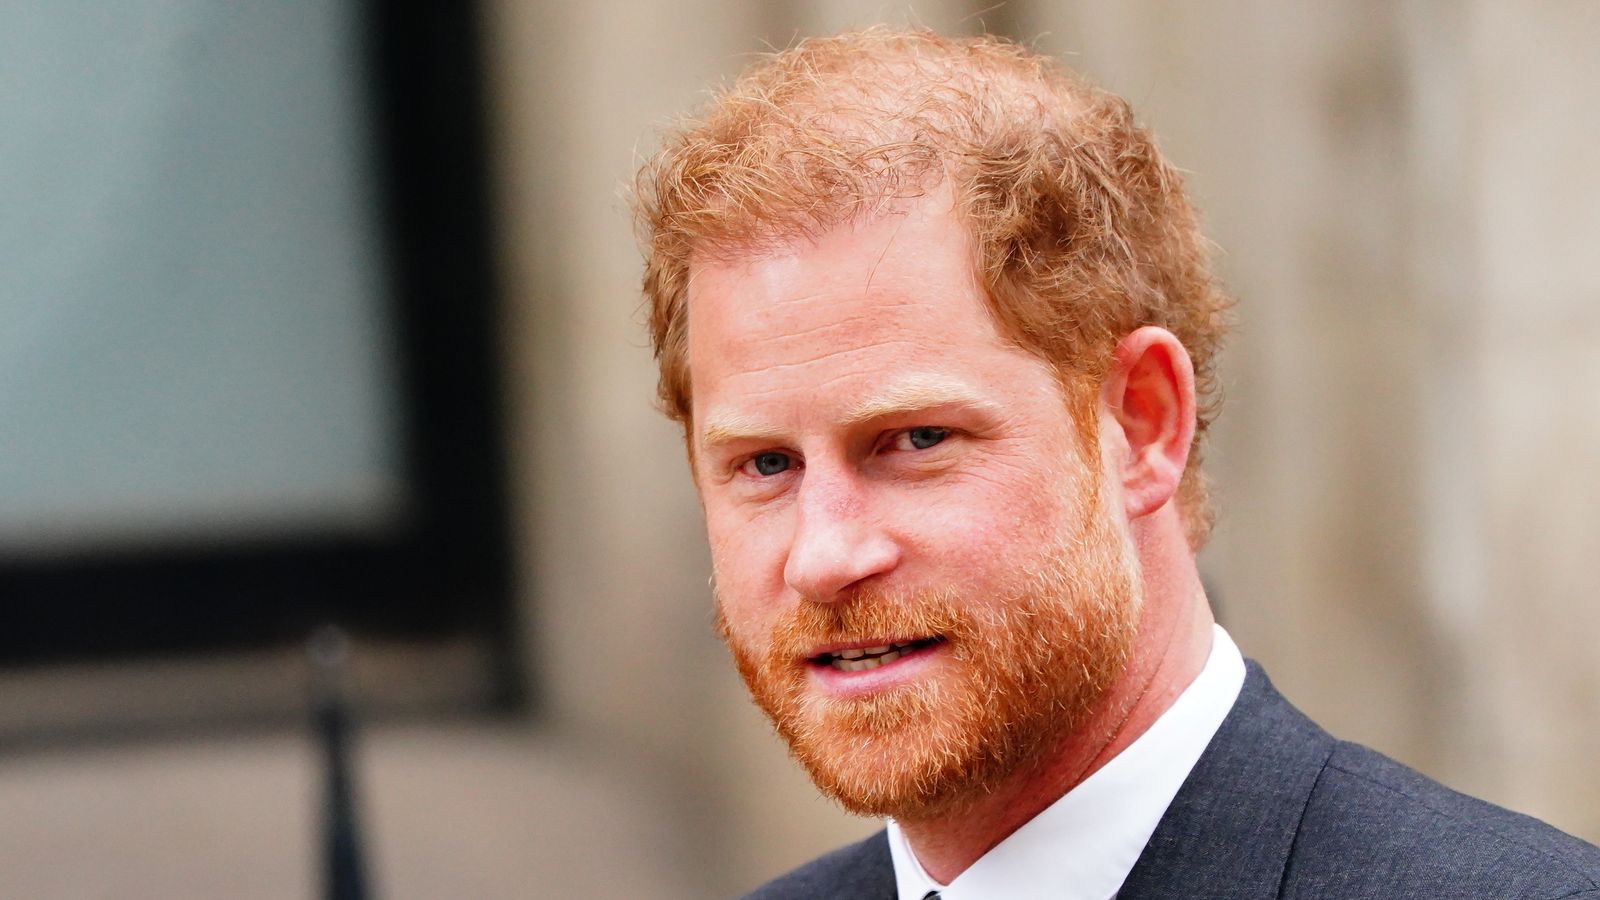 prince-harry-shares-update-on-king-charles-cancer-diagnosis-taylor-swifts-generous-donation